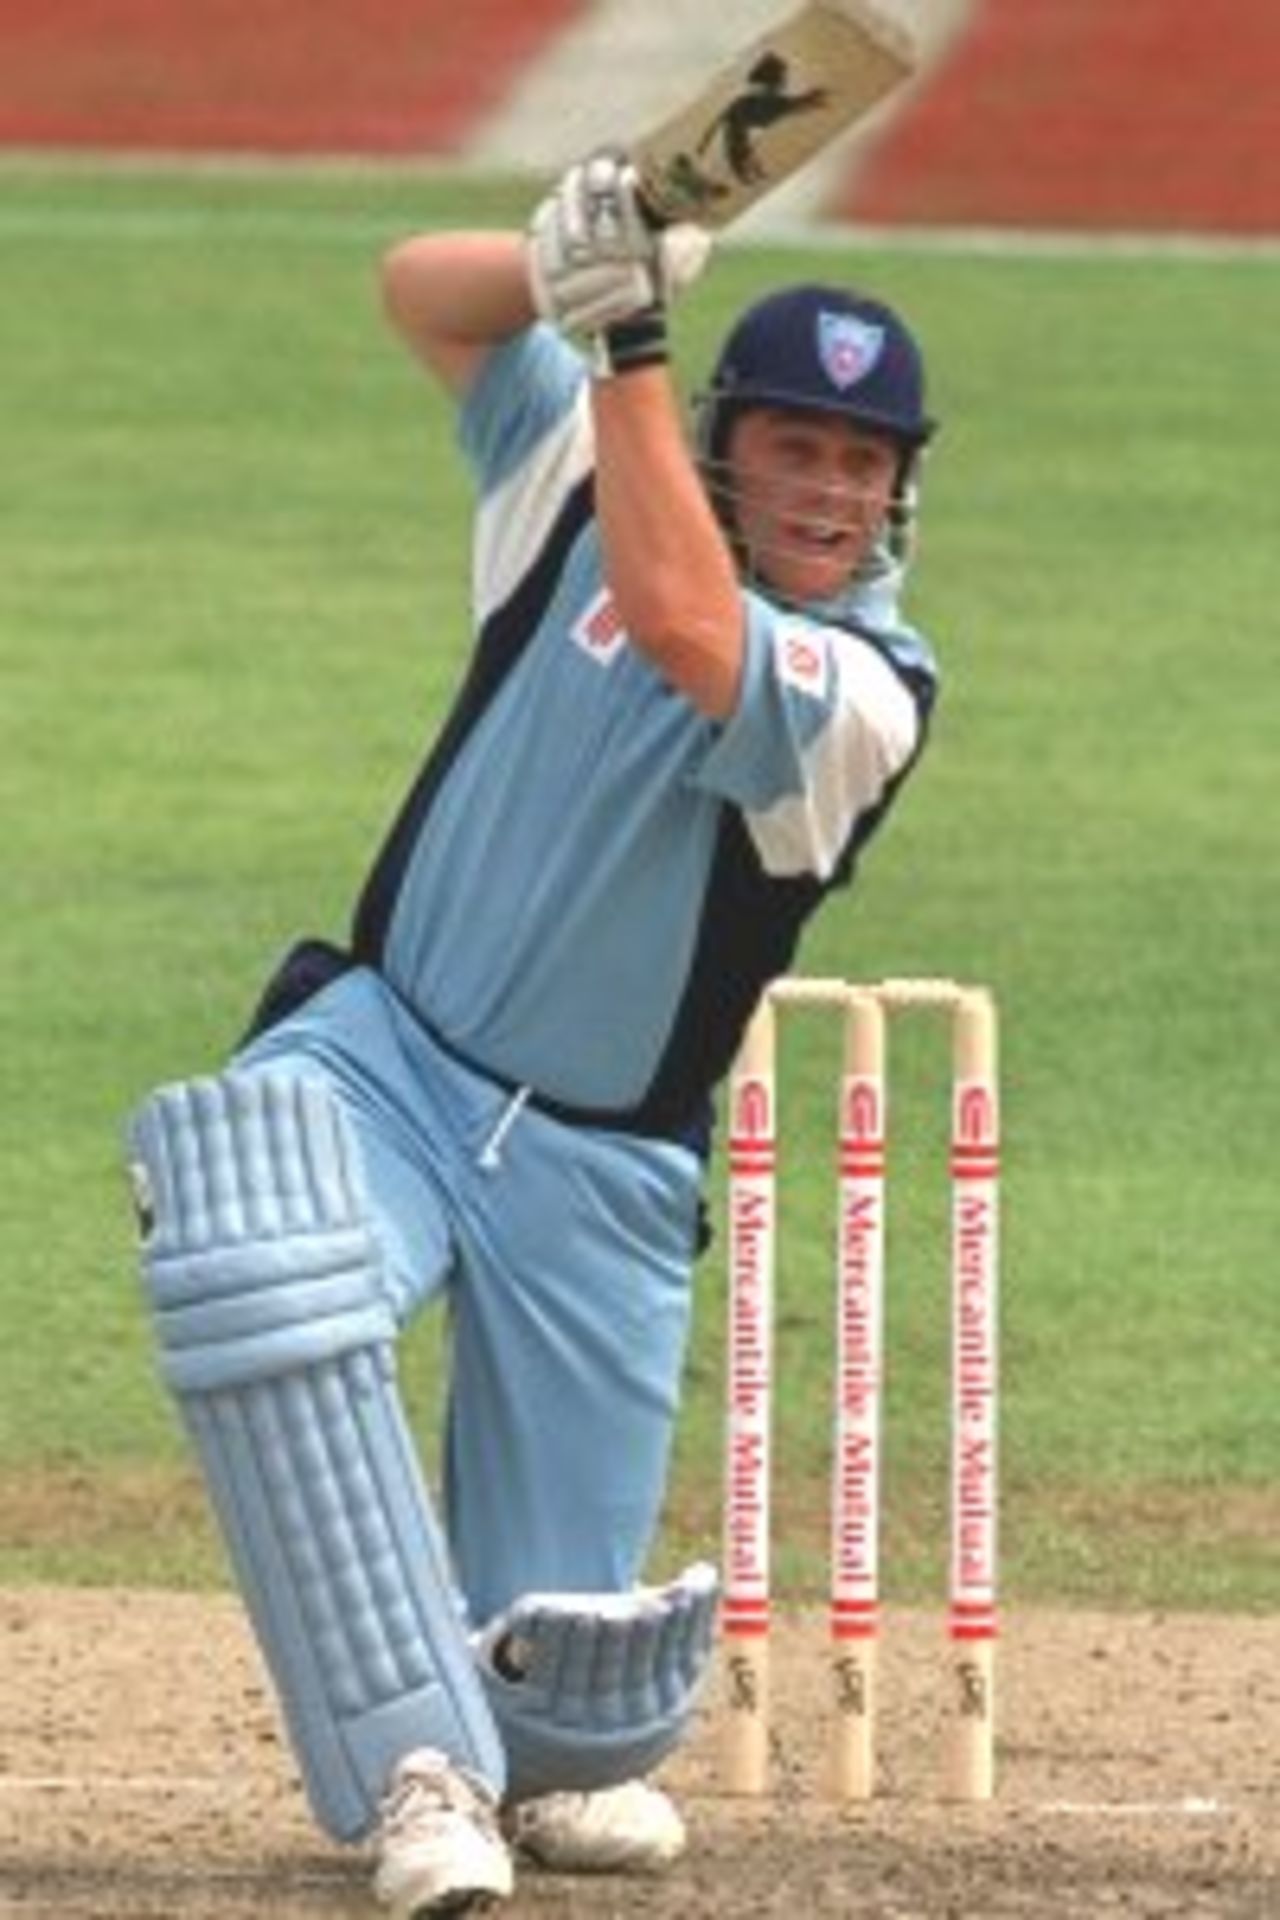 10 Oct 1999: Mark Higgs of NSW batting during the Mercantile Mutual Cup match between NSW v Victoria at North Sydney Oval, Sydney, Australia.